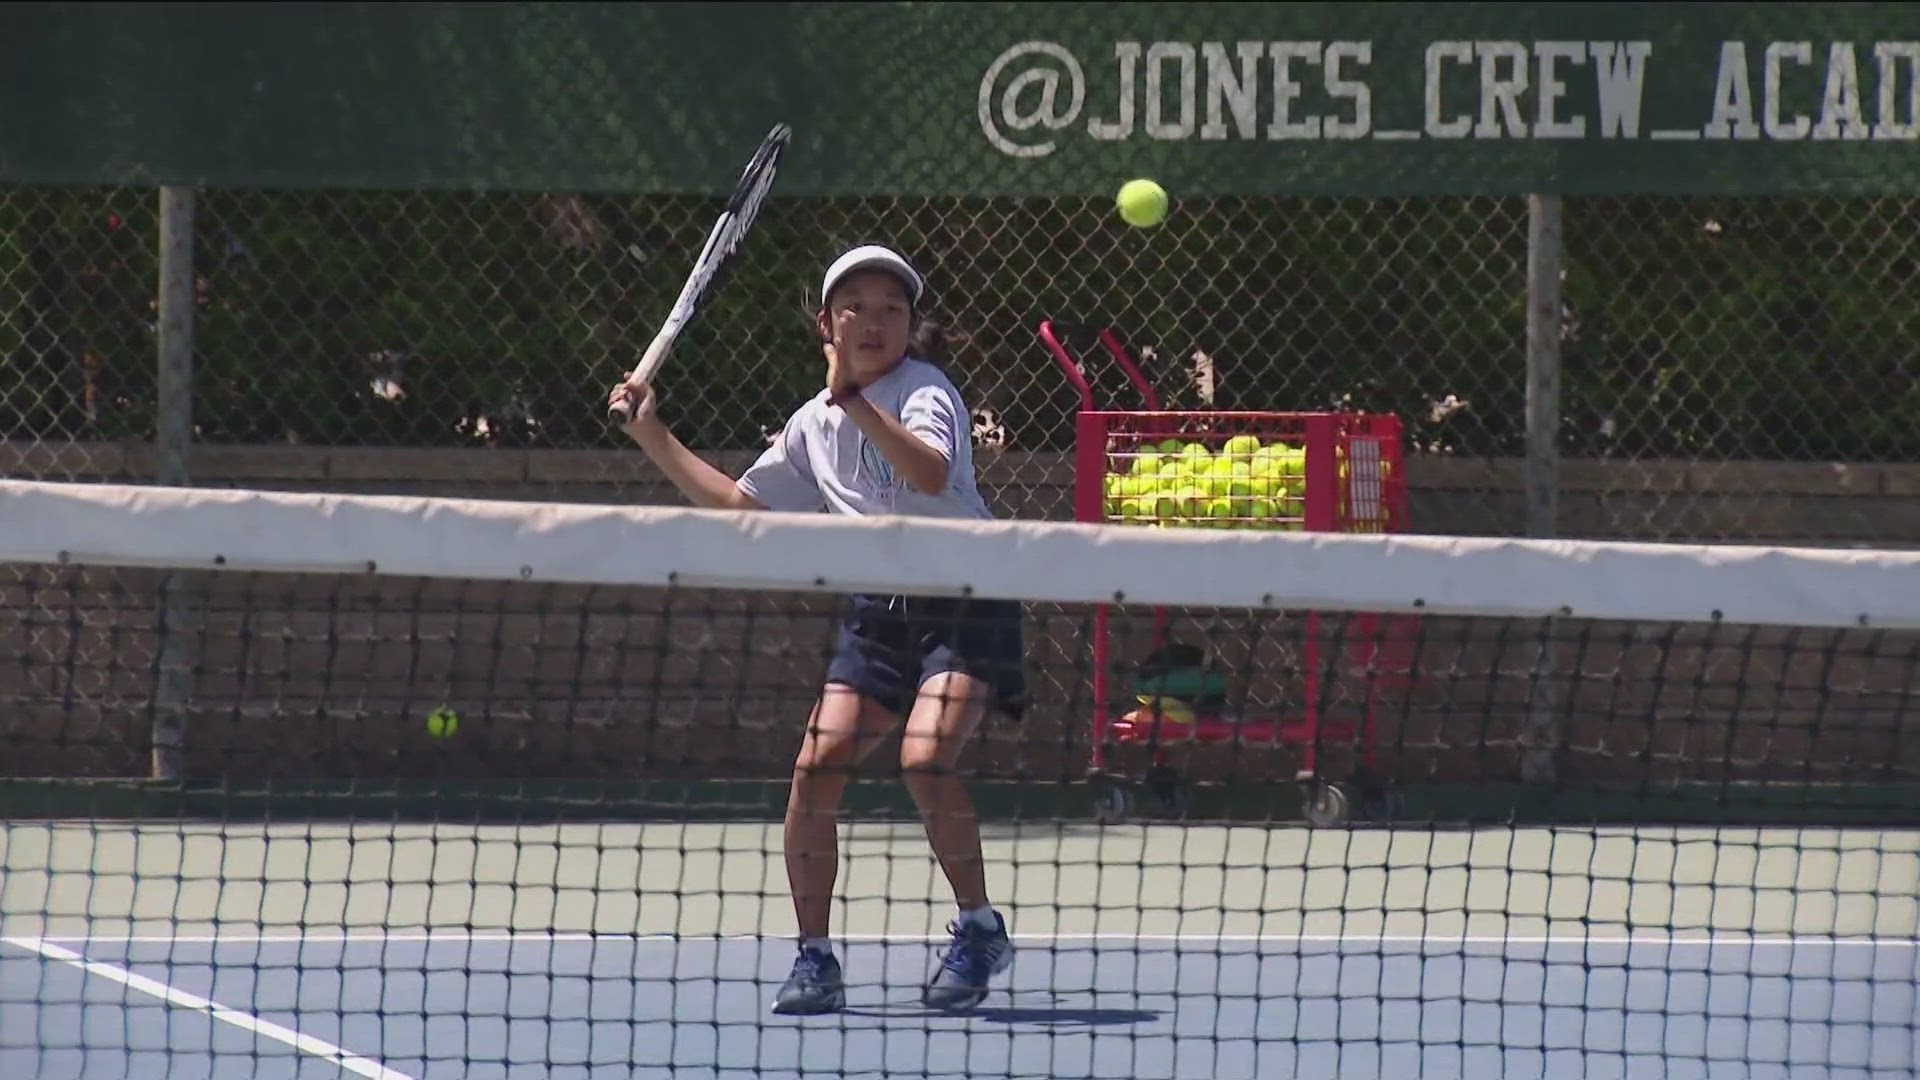 Del Mar tennis club owners work to make sport more inclusive cbs8